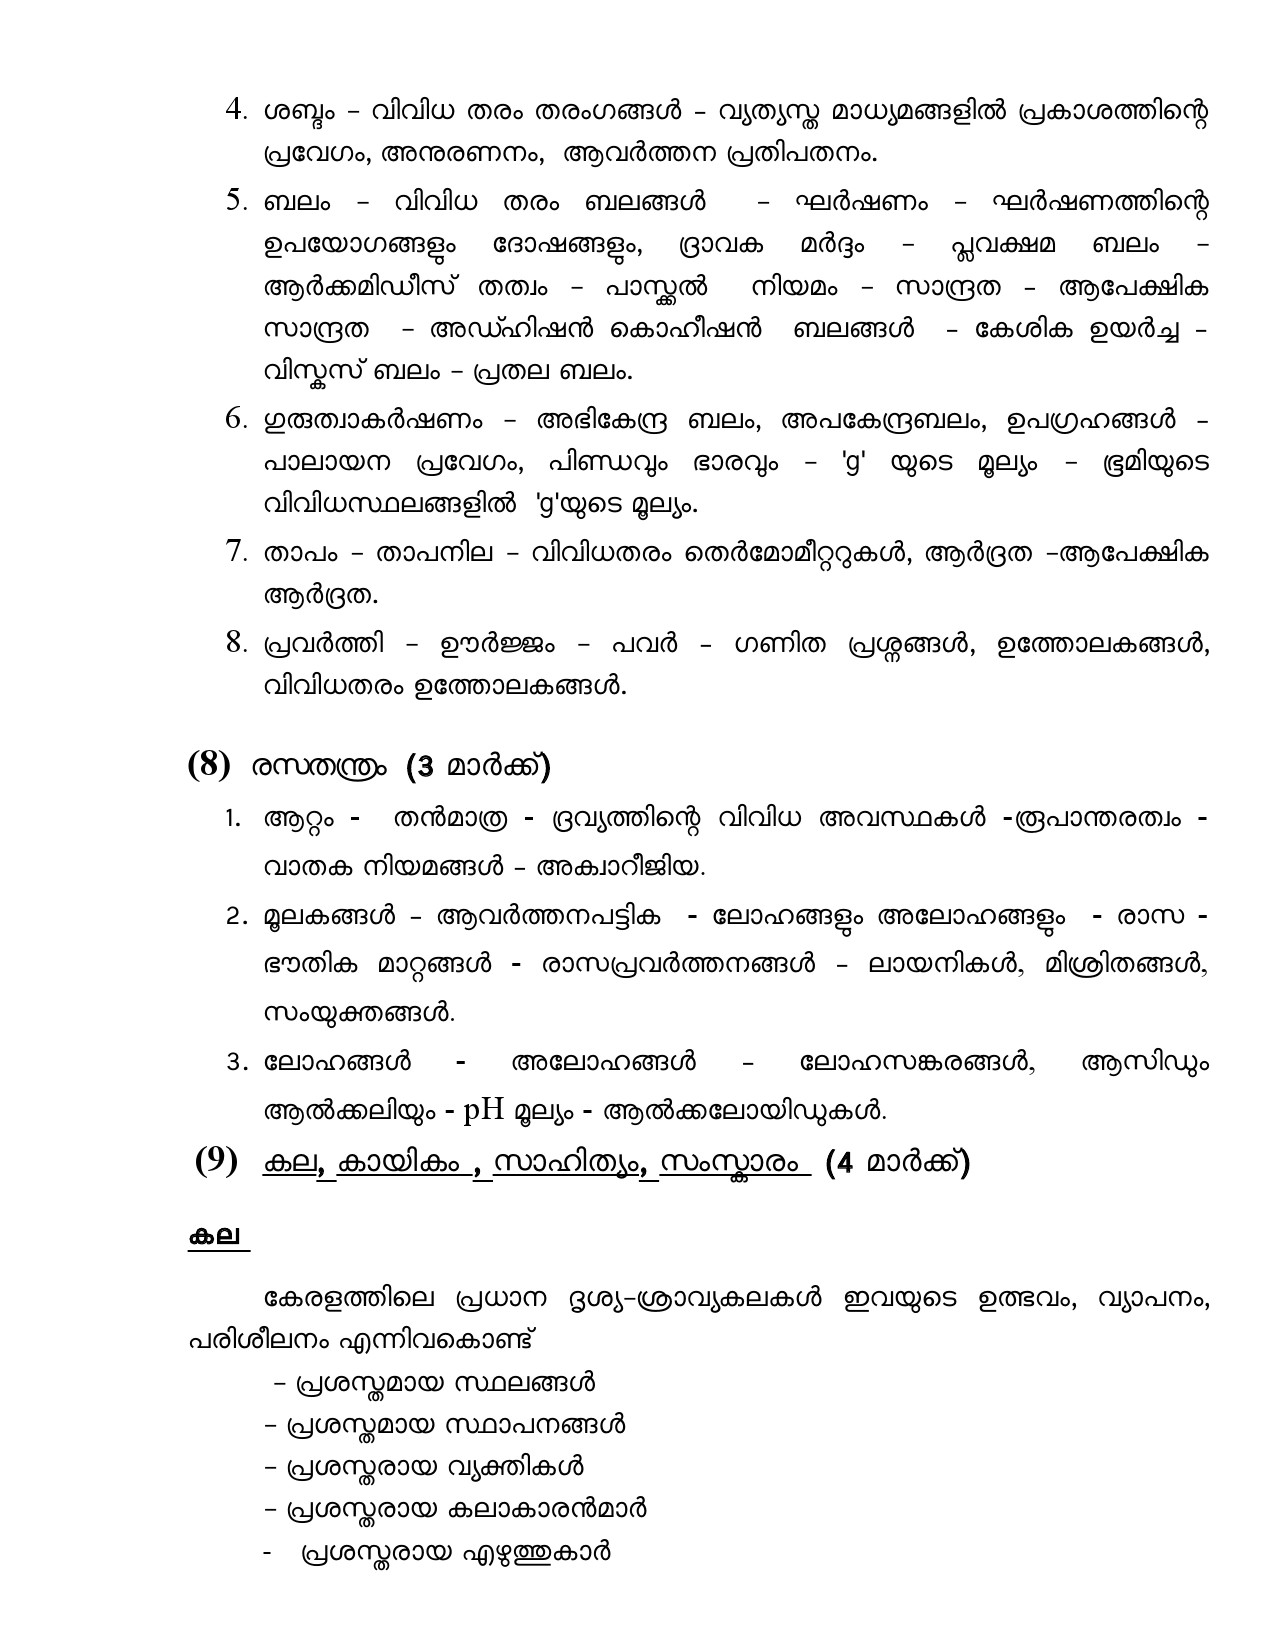 Beat Forest Officer Final Examination Syllabus For Plus Two Level - Notification Image 5